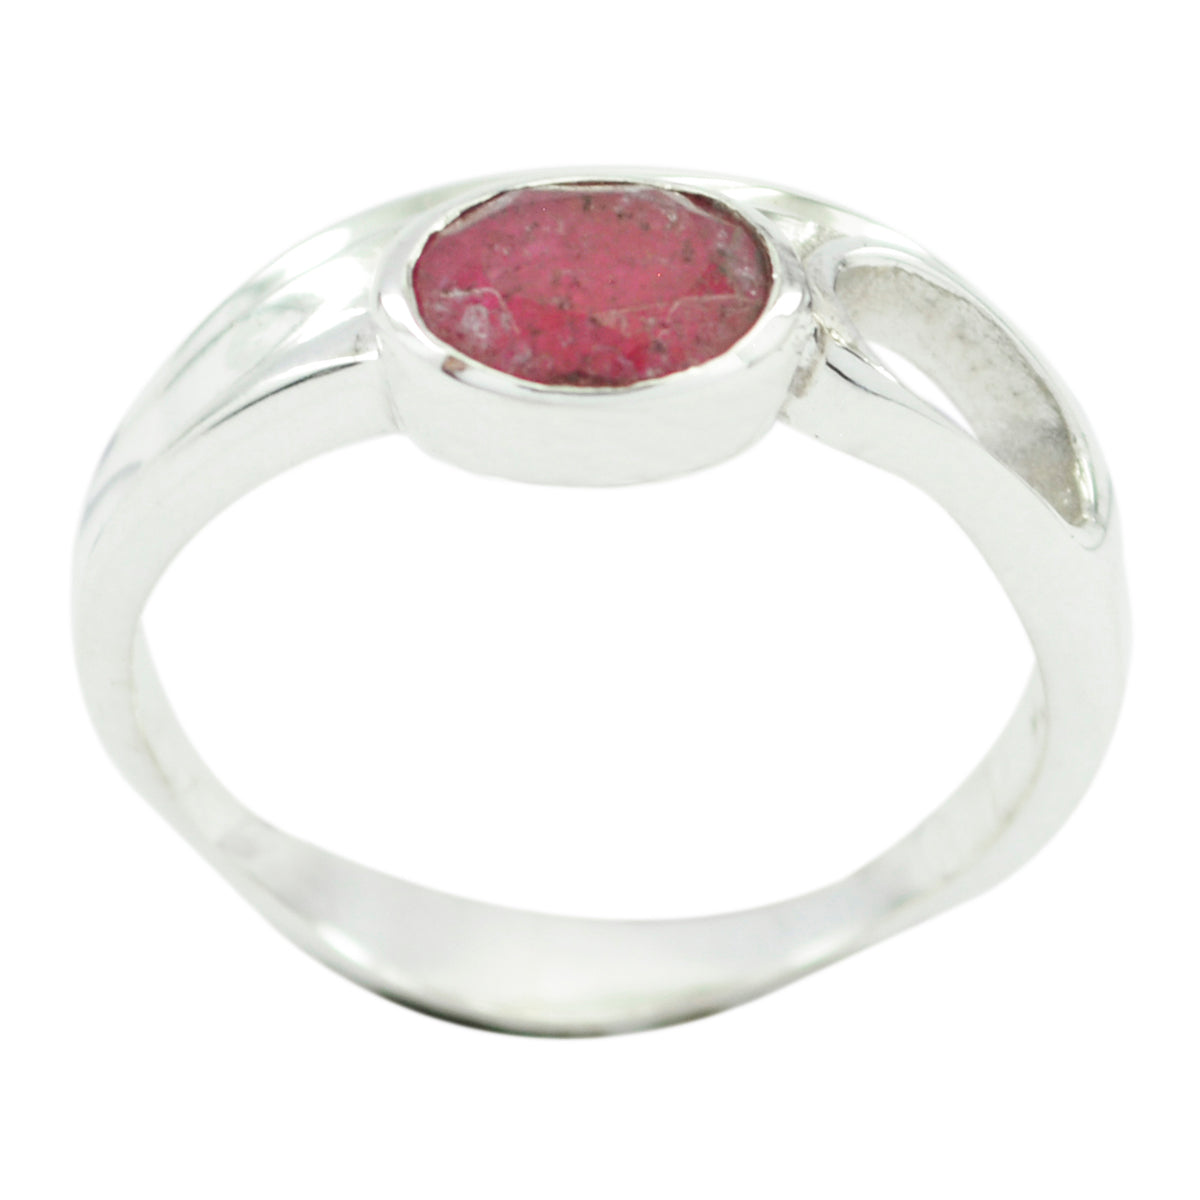 Attractive Stone Indianruby Sterling Silver Ring Jewelry Making Class